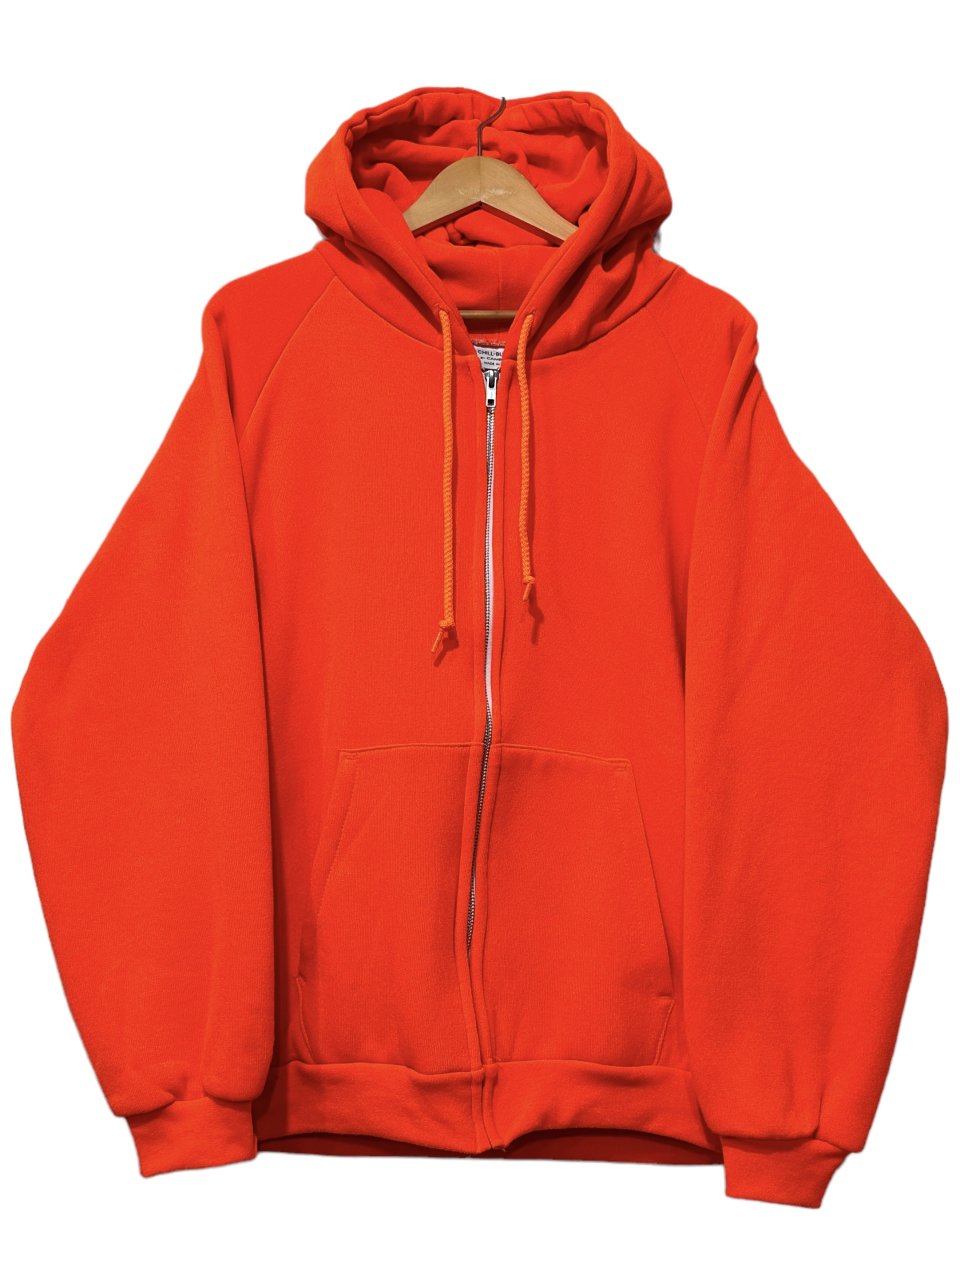 USA製 CAMBER CHILL-BUSTER Thermal Lined Zip-Up Hoodie オレンジ L